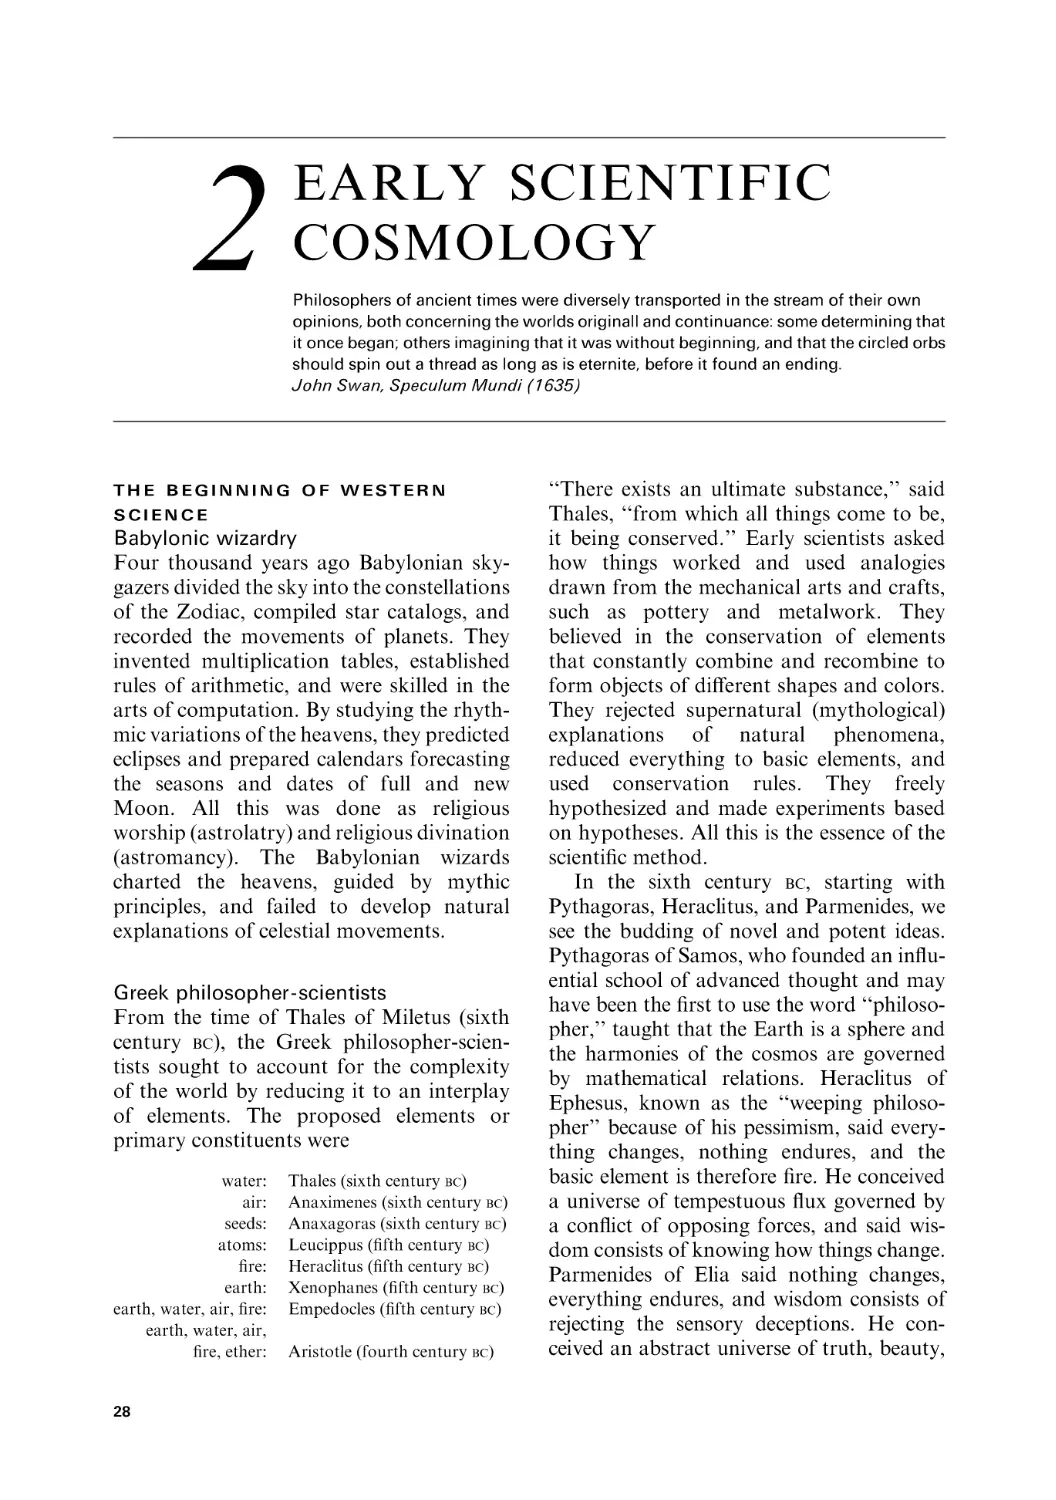 2 Early scientific cosmology